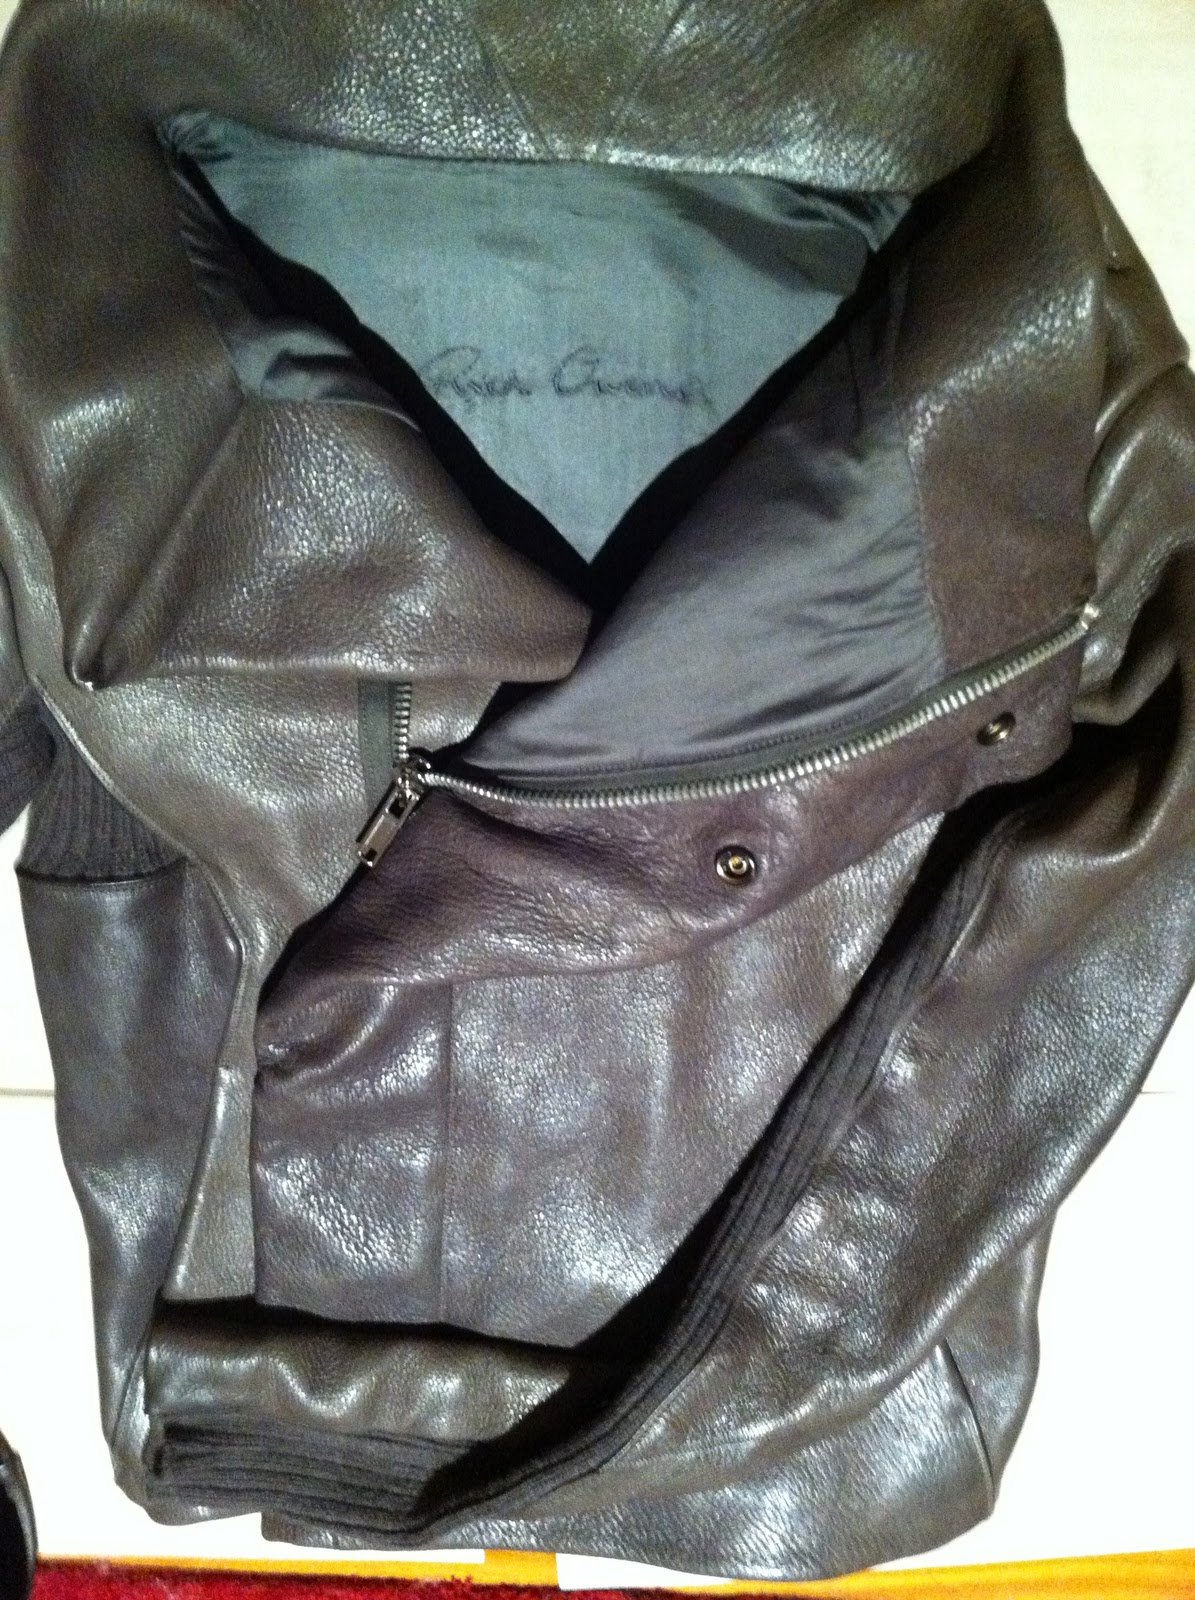 Ms. Louisa: Due Diligence on Rick Owens leather jacket